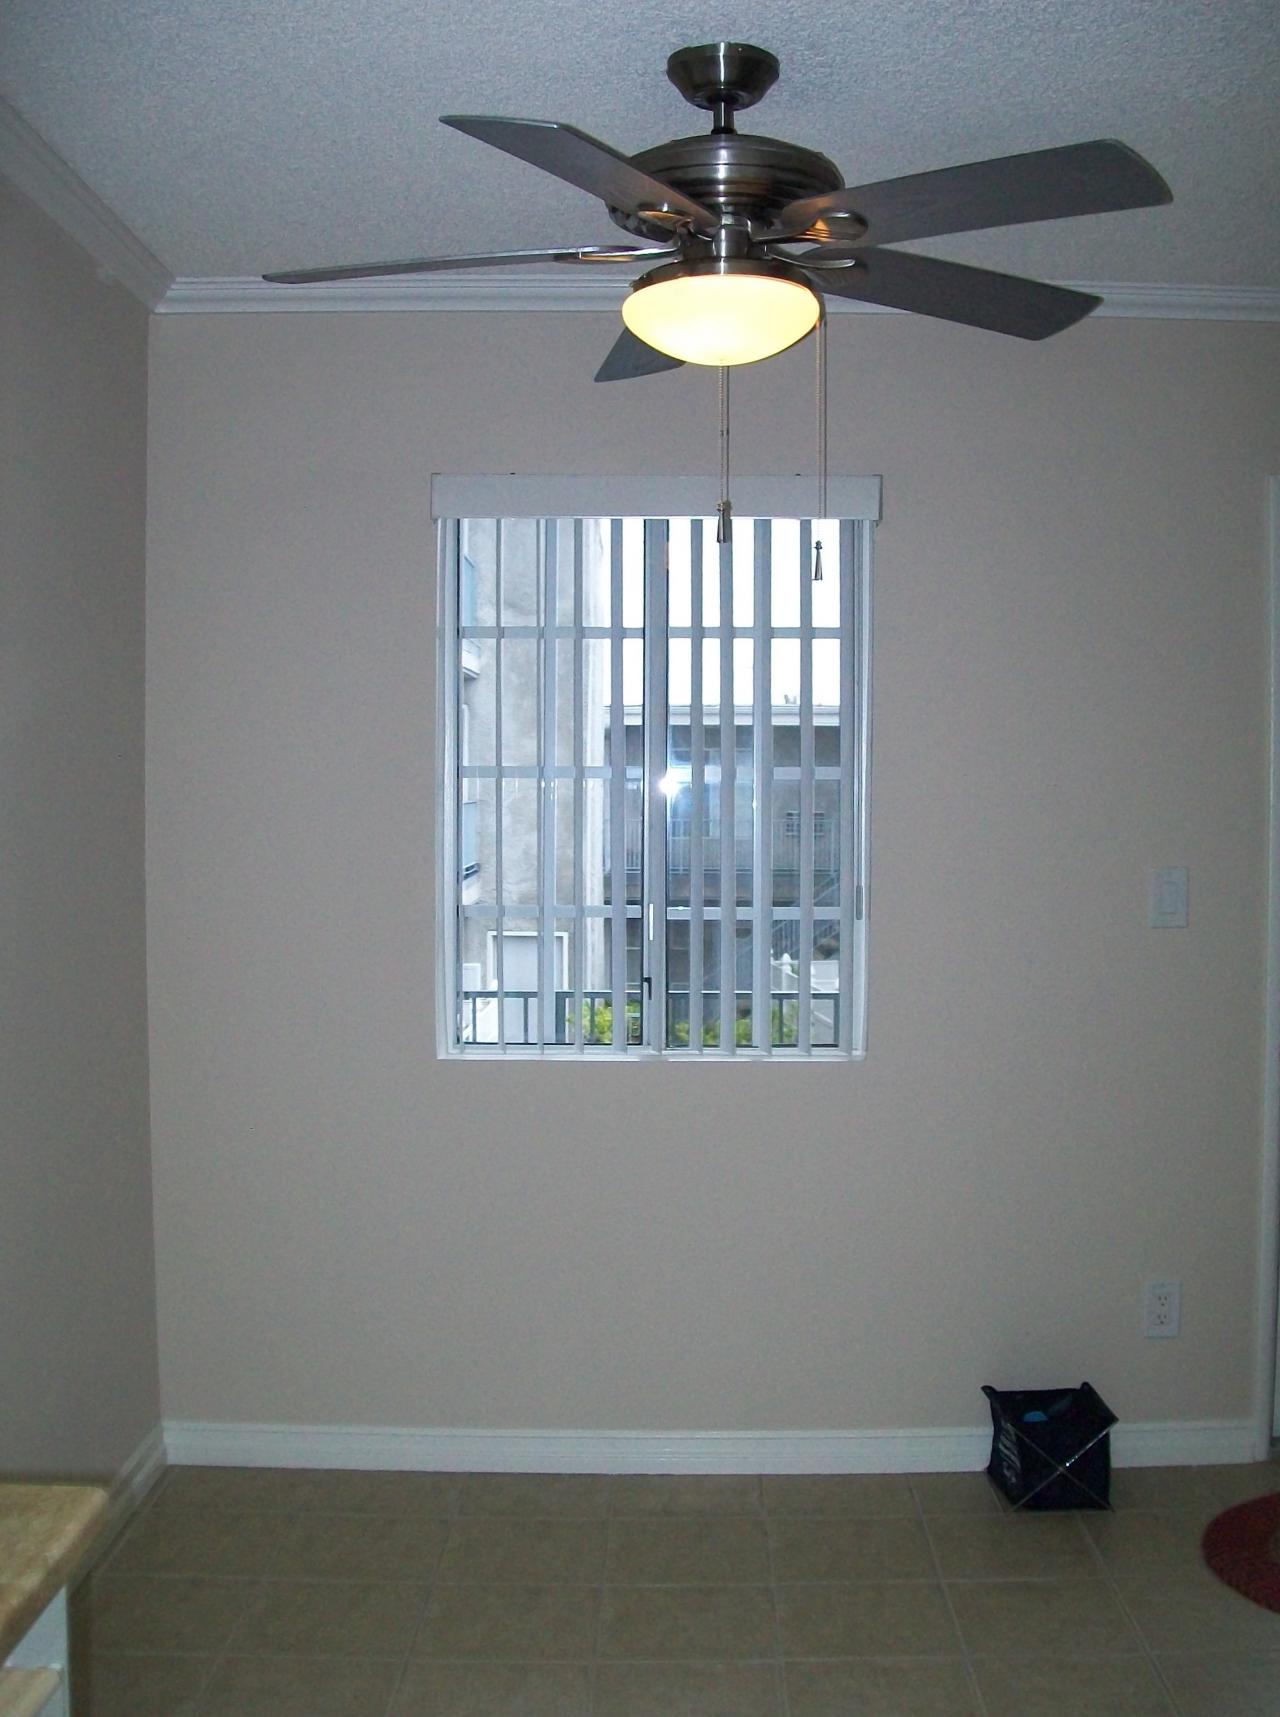 Photo of Kingsbury Villas Apartments - an interior view of ceiling fan room